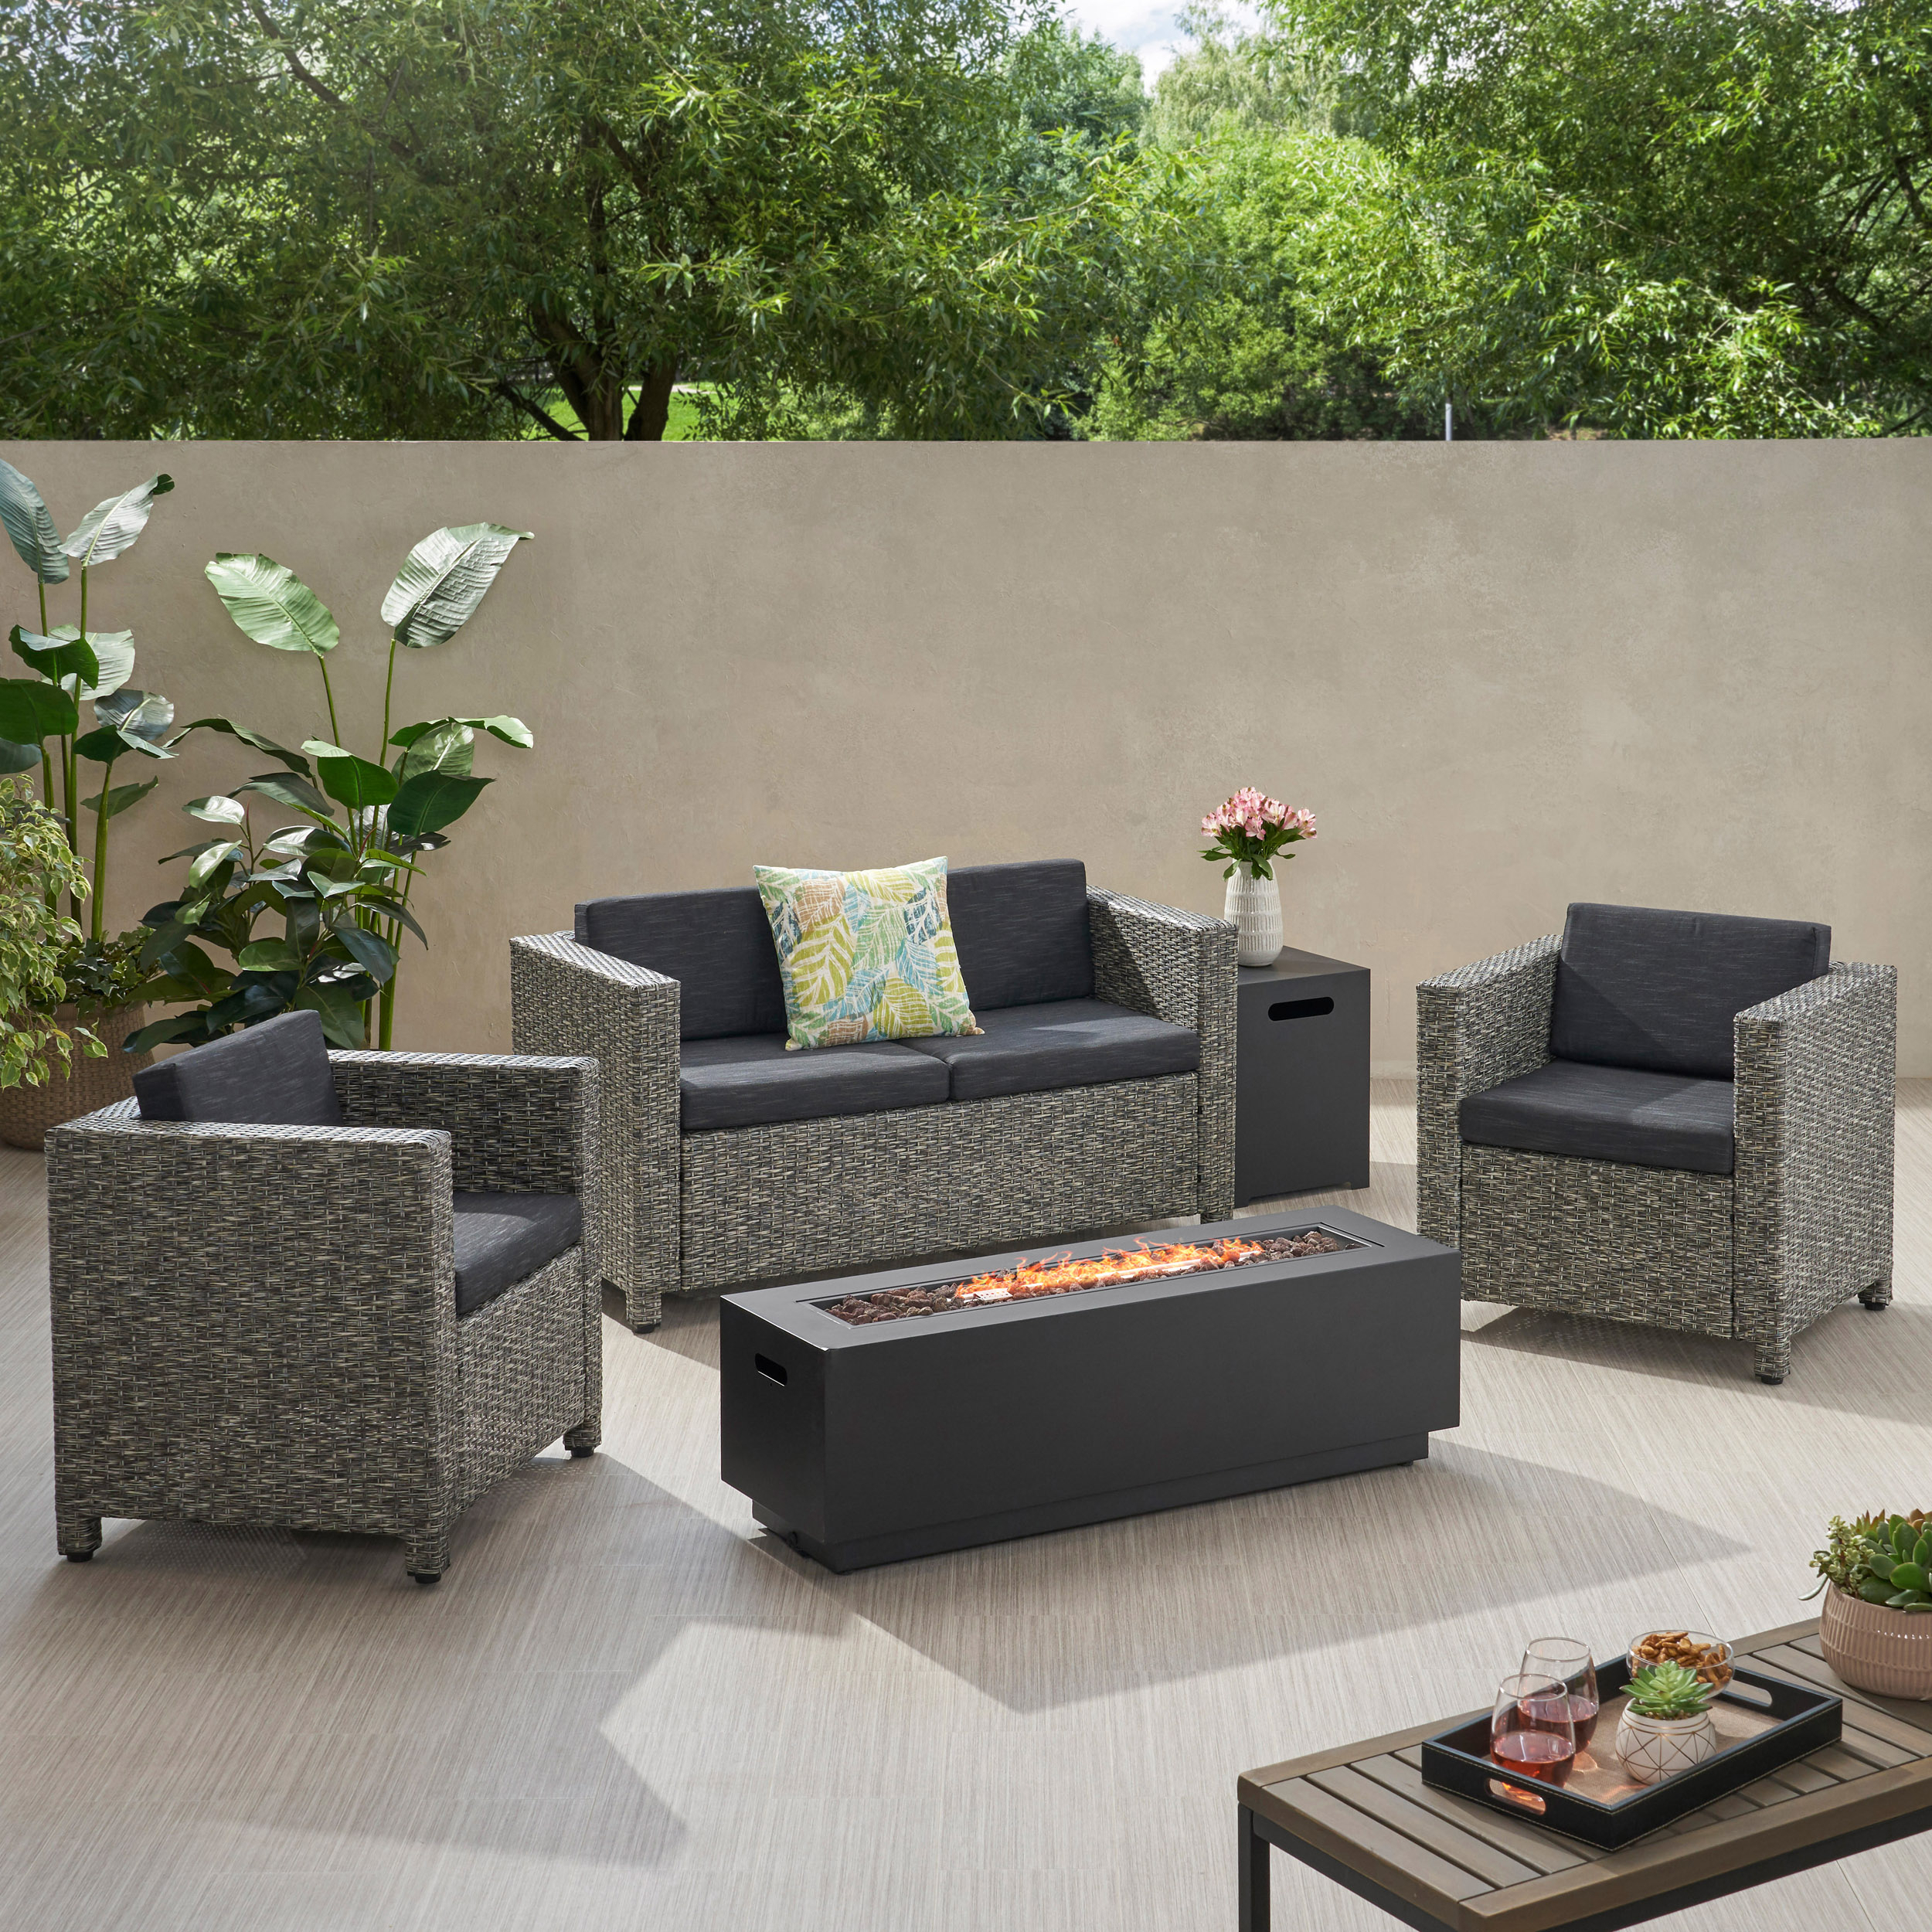 Roxanne 4 Seater Wicker Chat Set With Fire Pit - Mix Black / Dark Gray